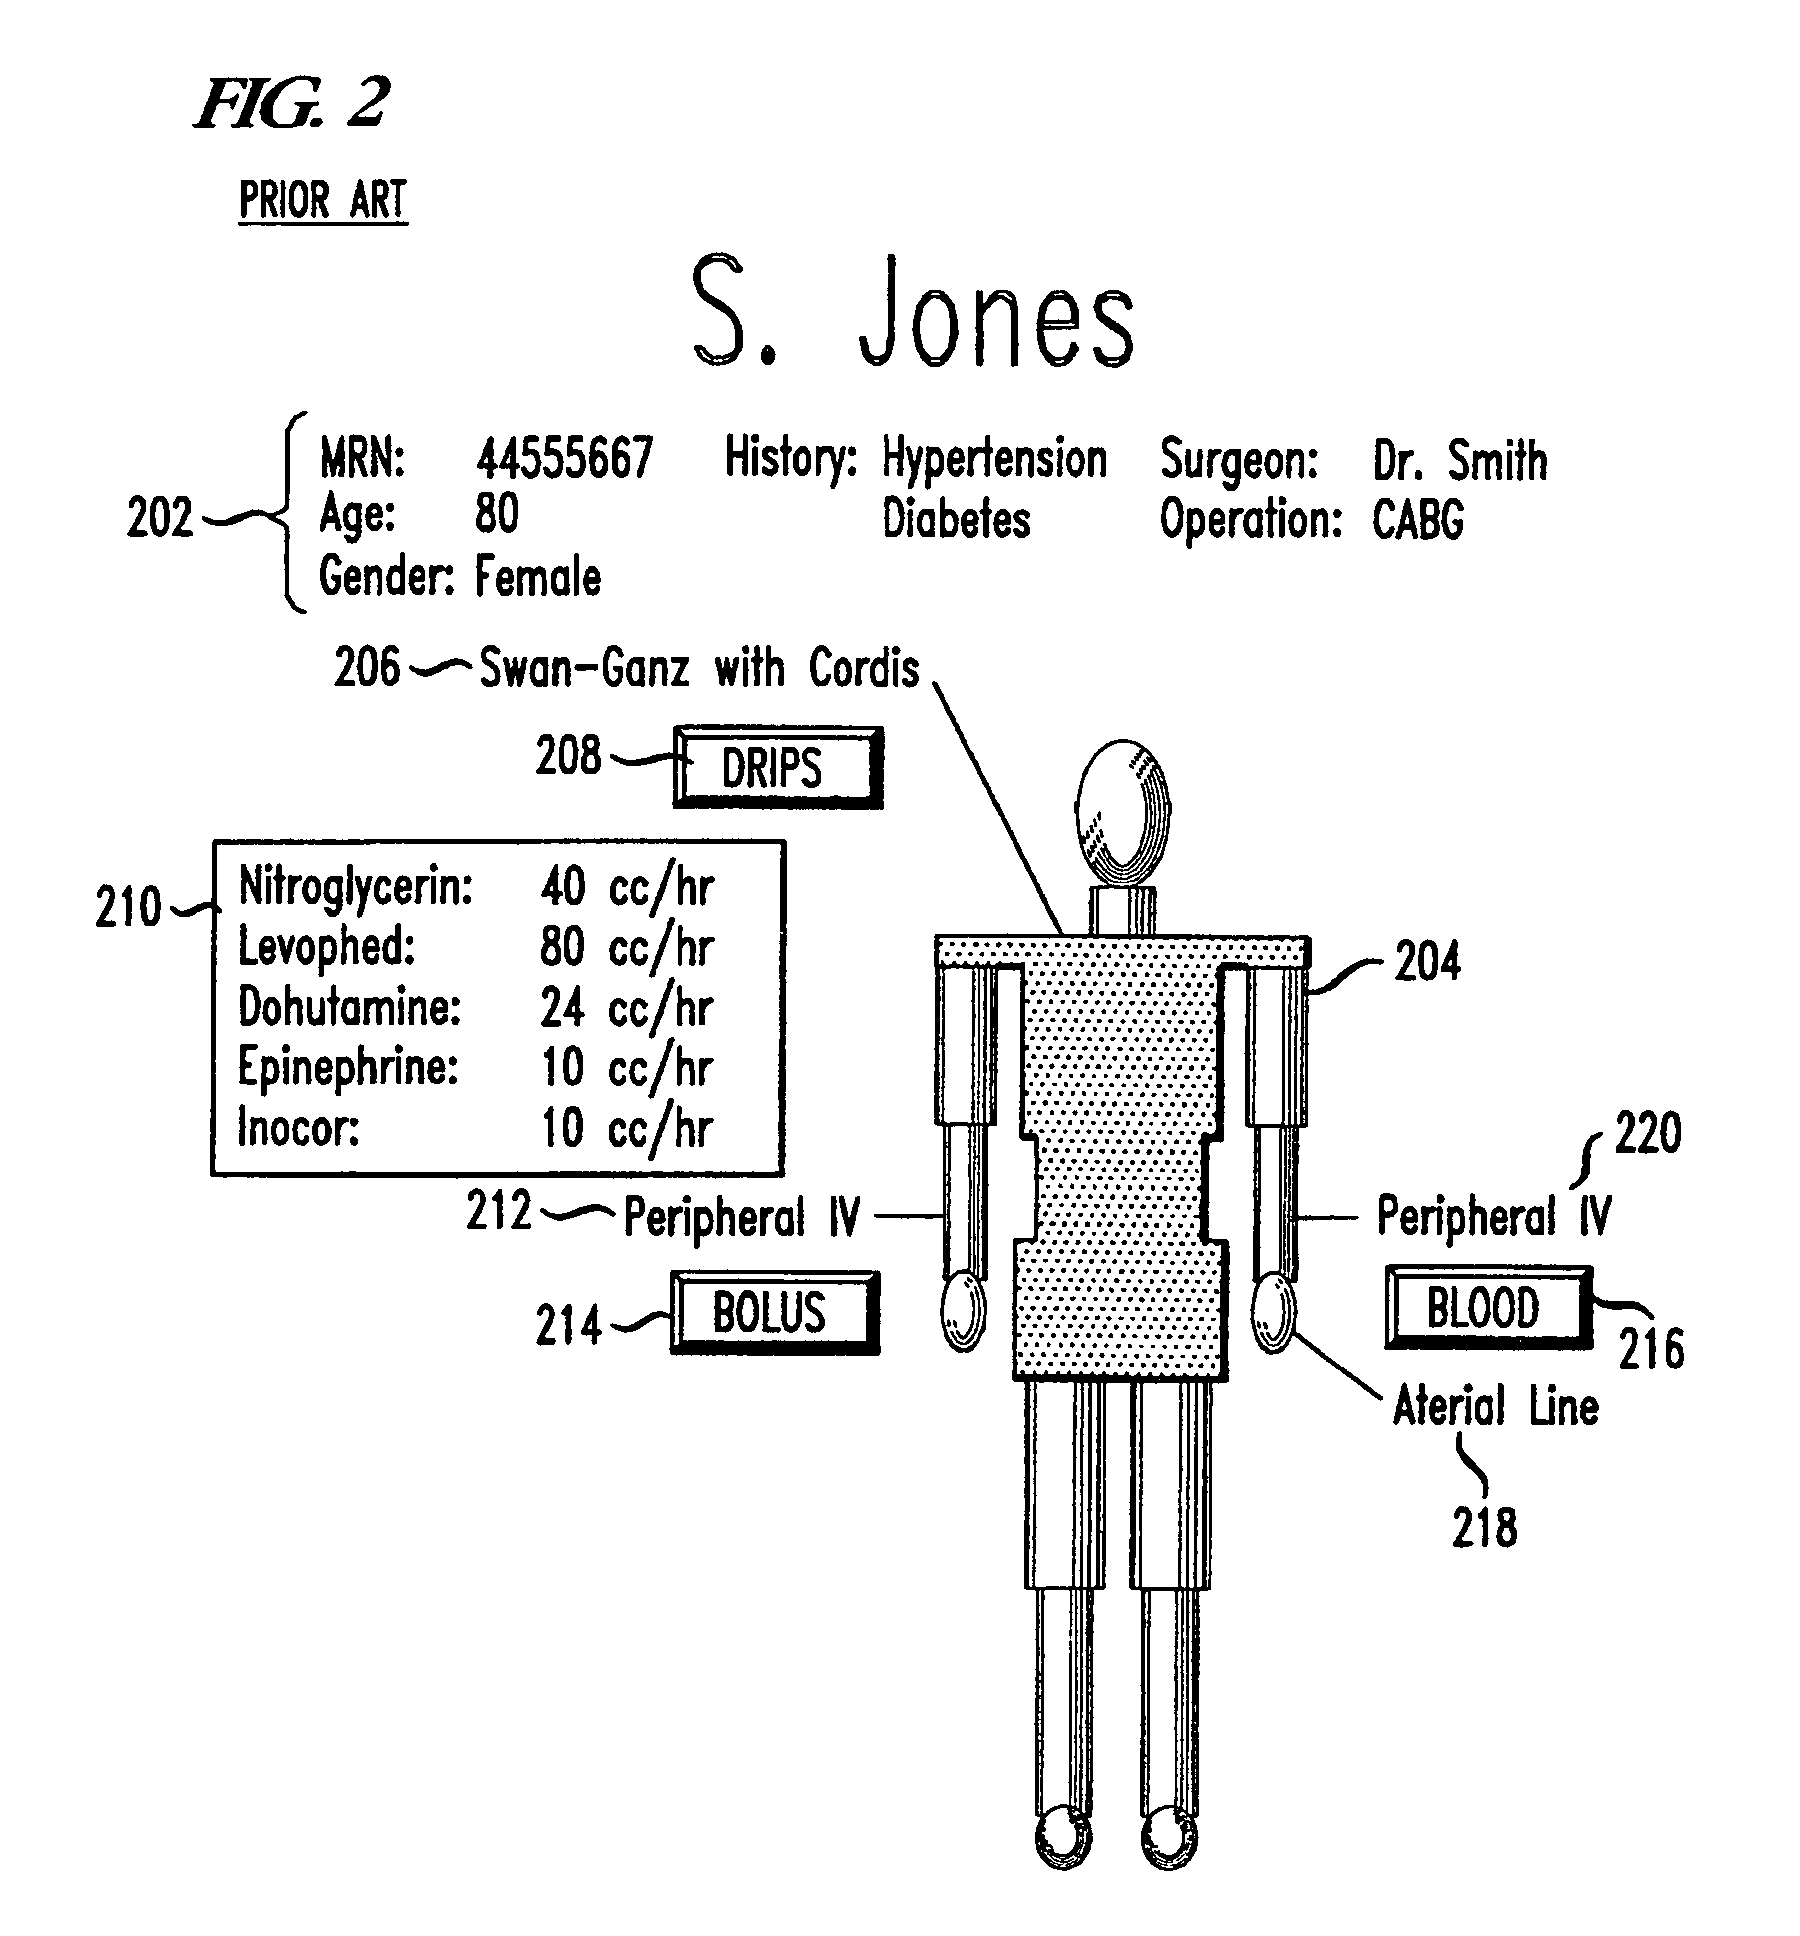 System and method for accessing and annotating electronic medical records using a multi-modal interface